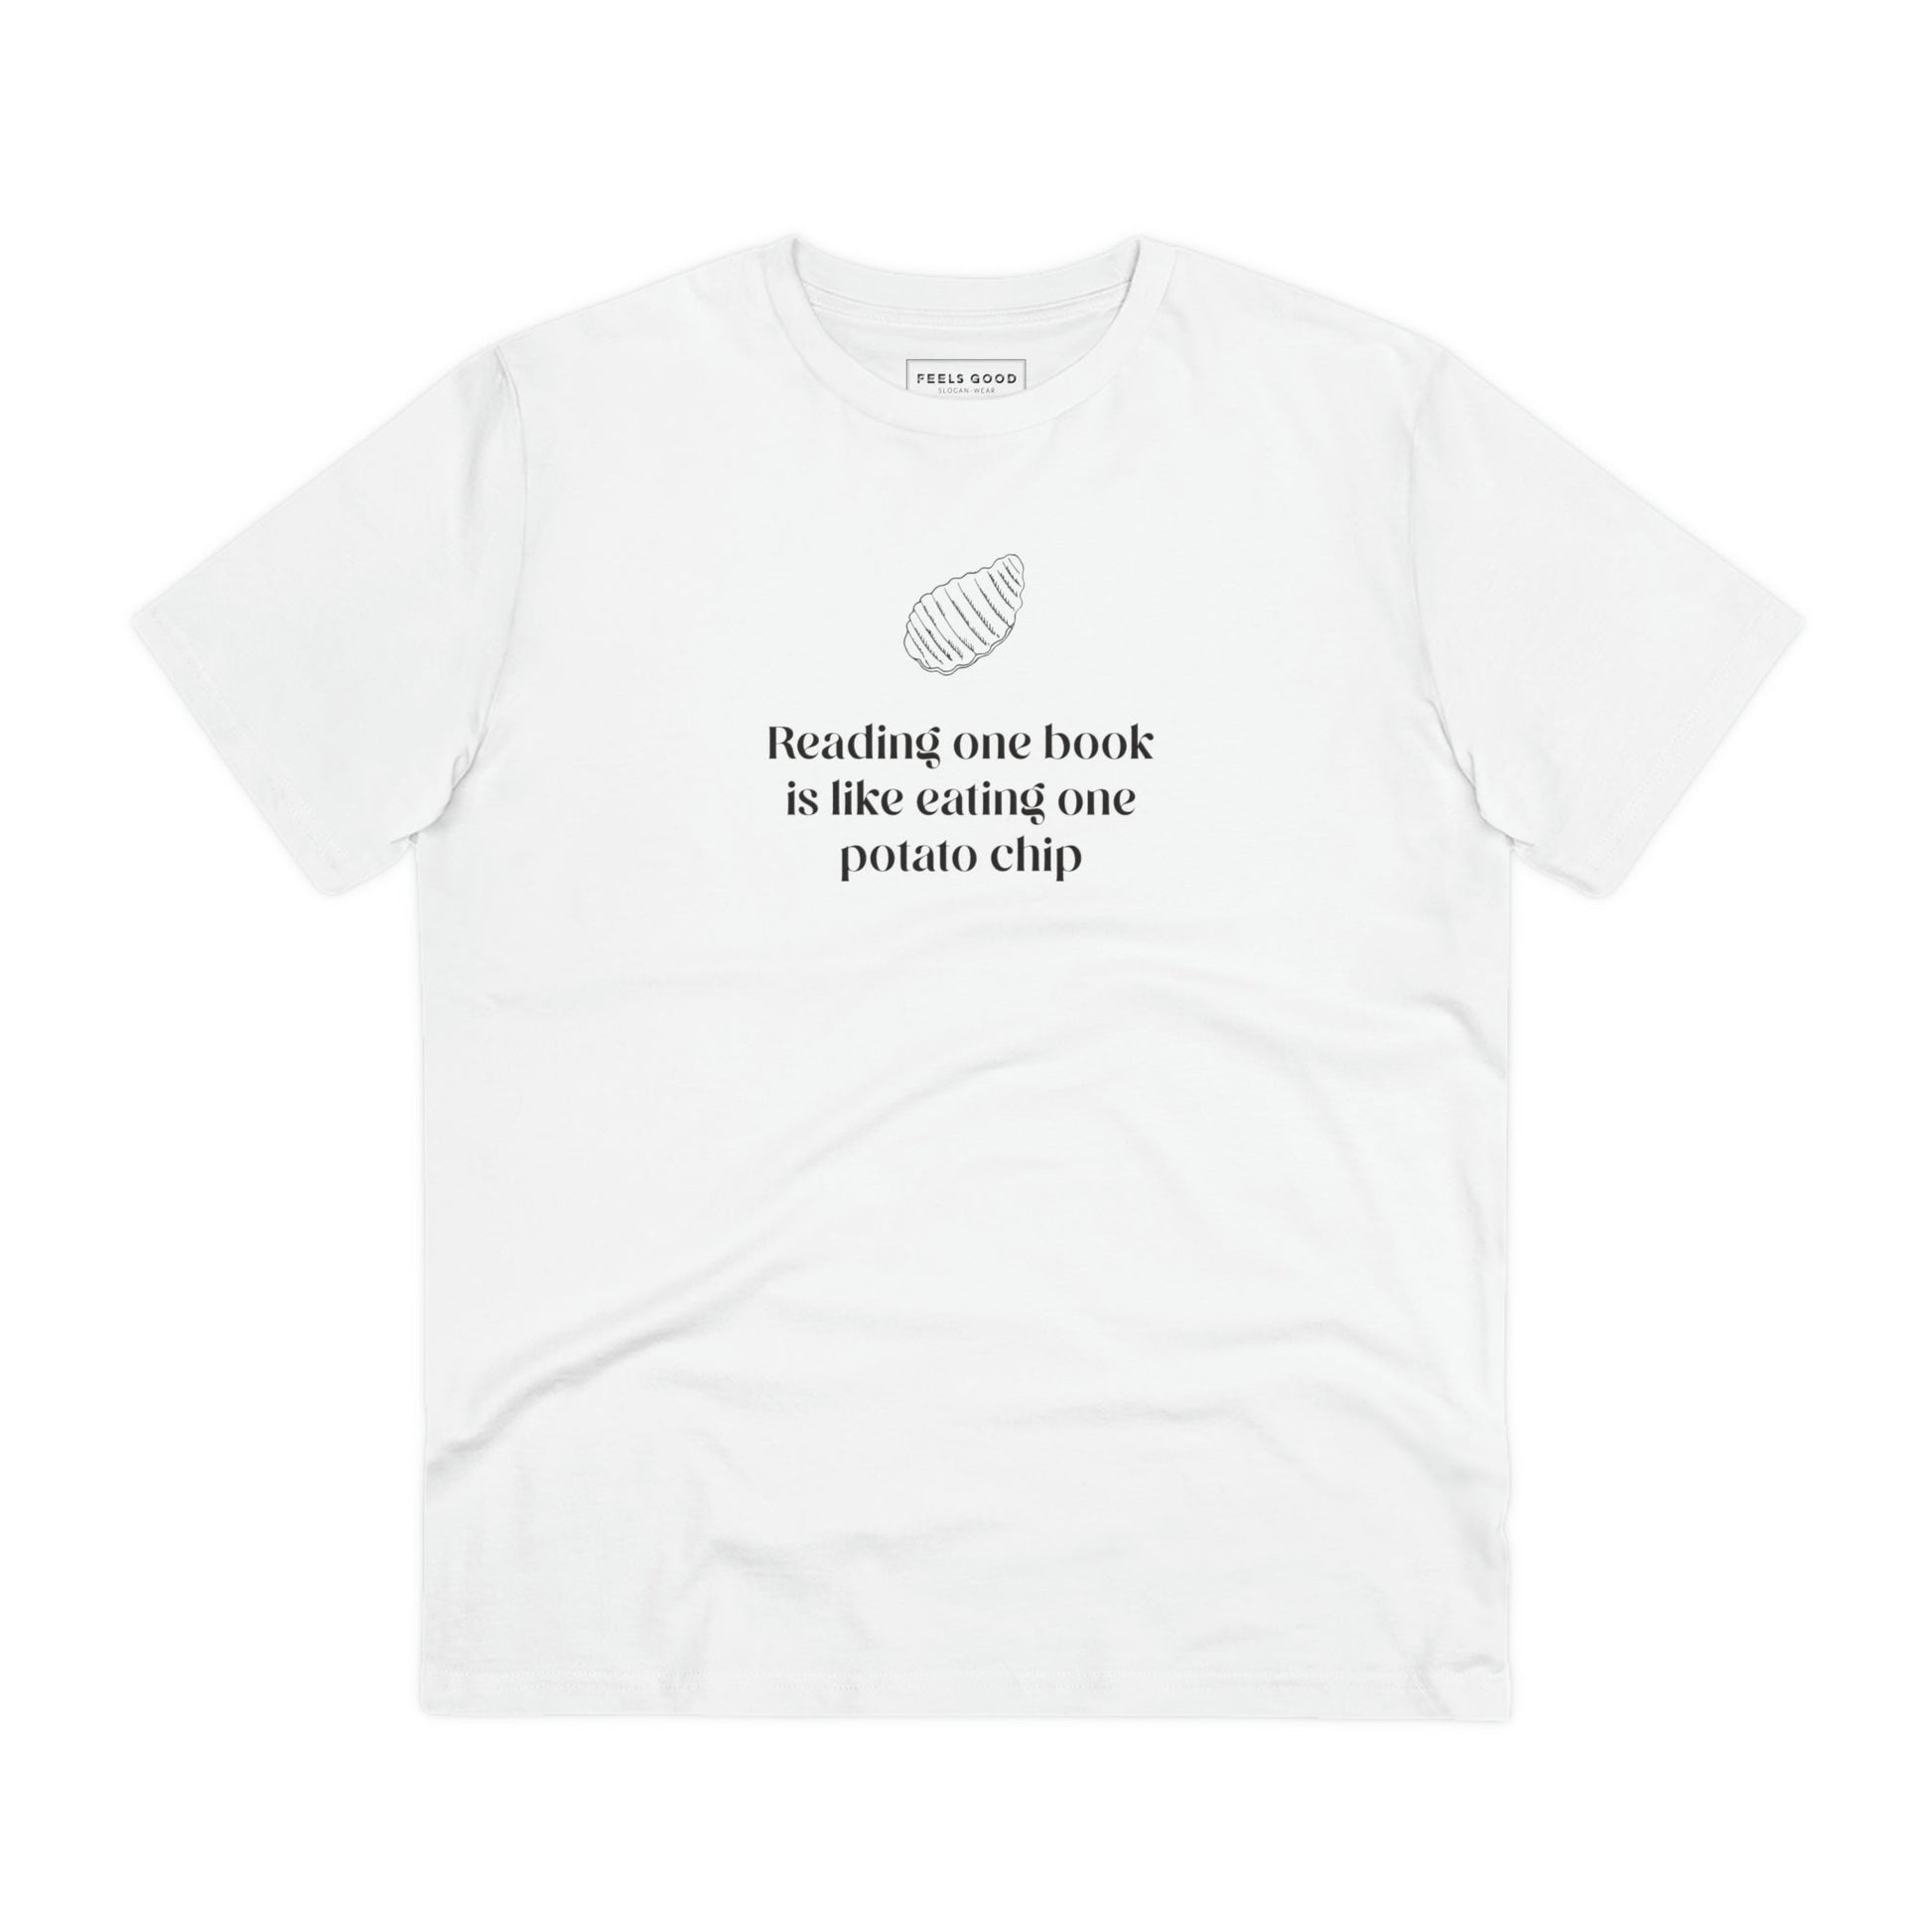 Books 'Can I Have More' Organic Cotton T-shirt - Book worm